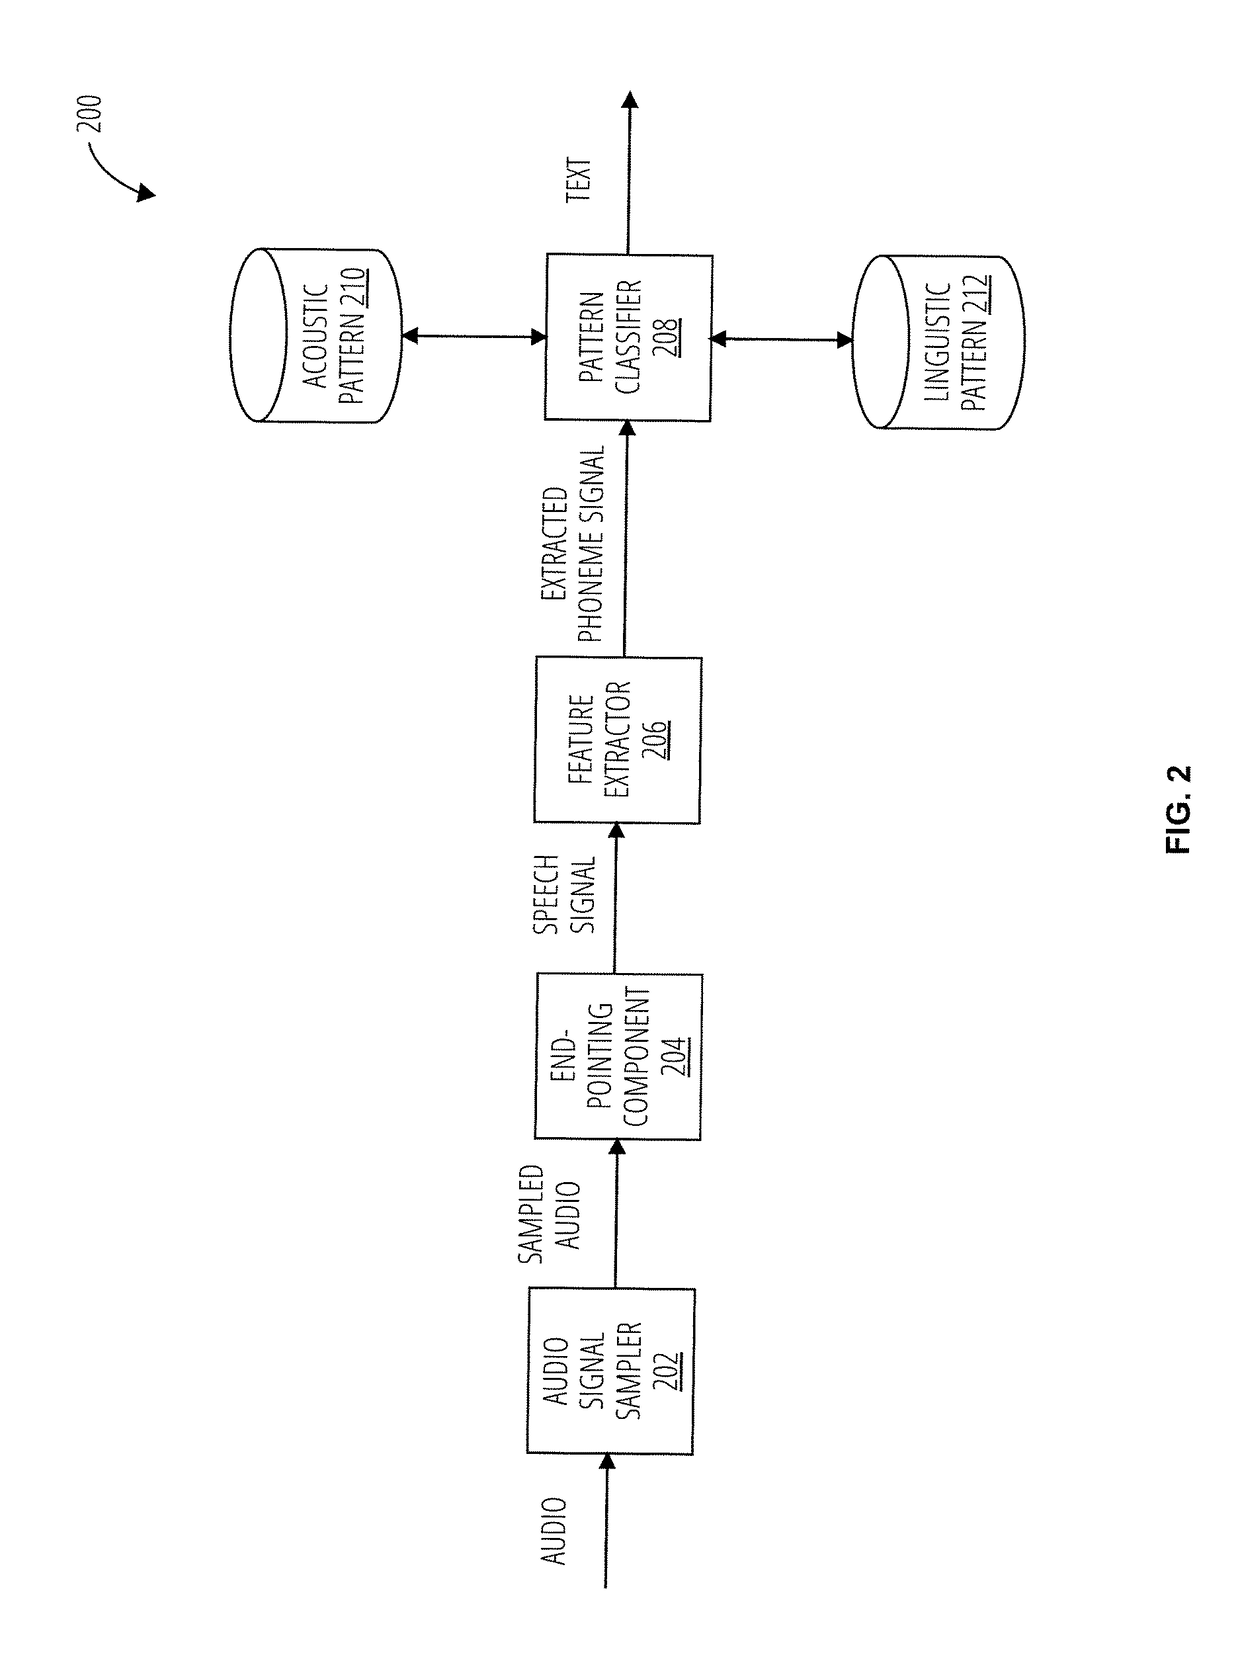 System and methods for nutrition monitoring